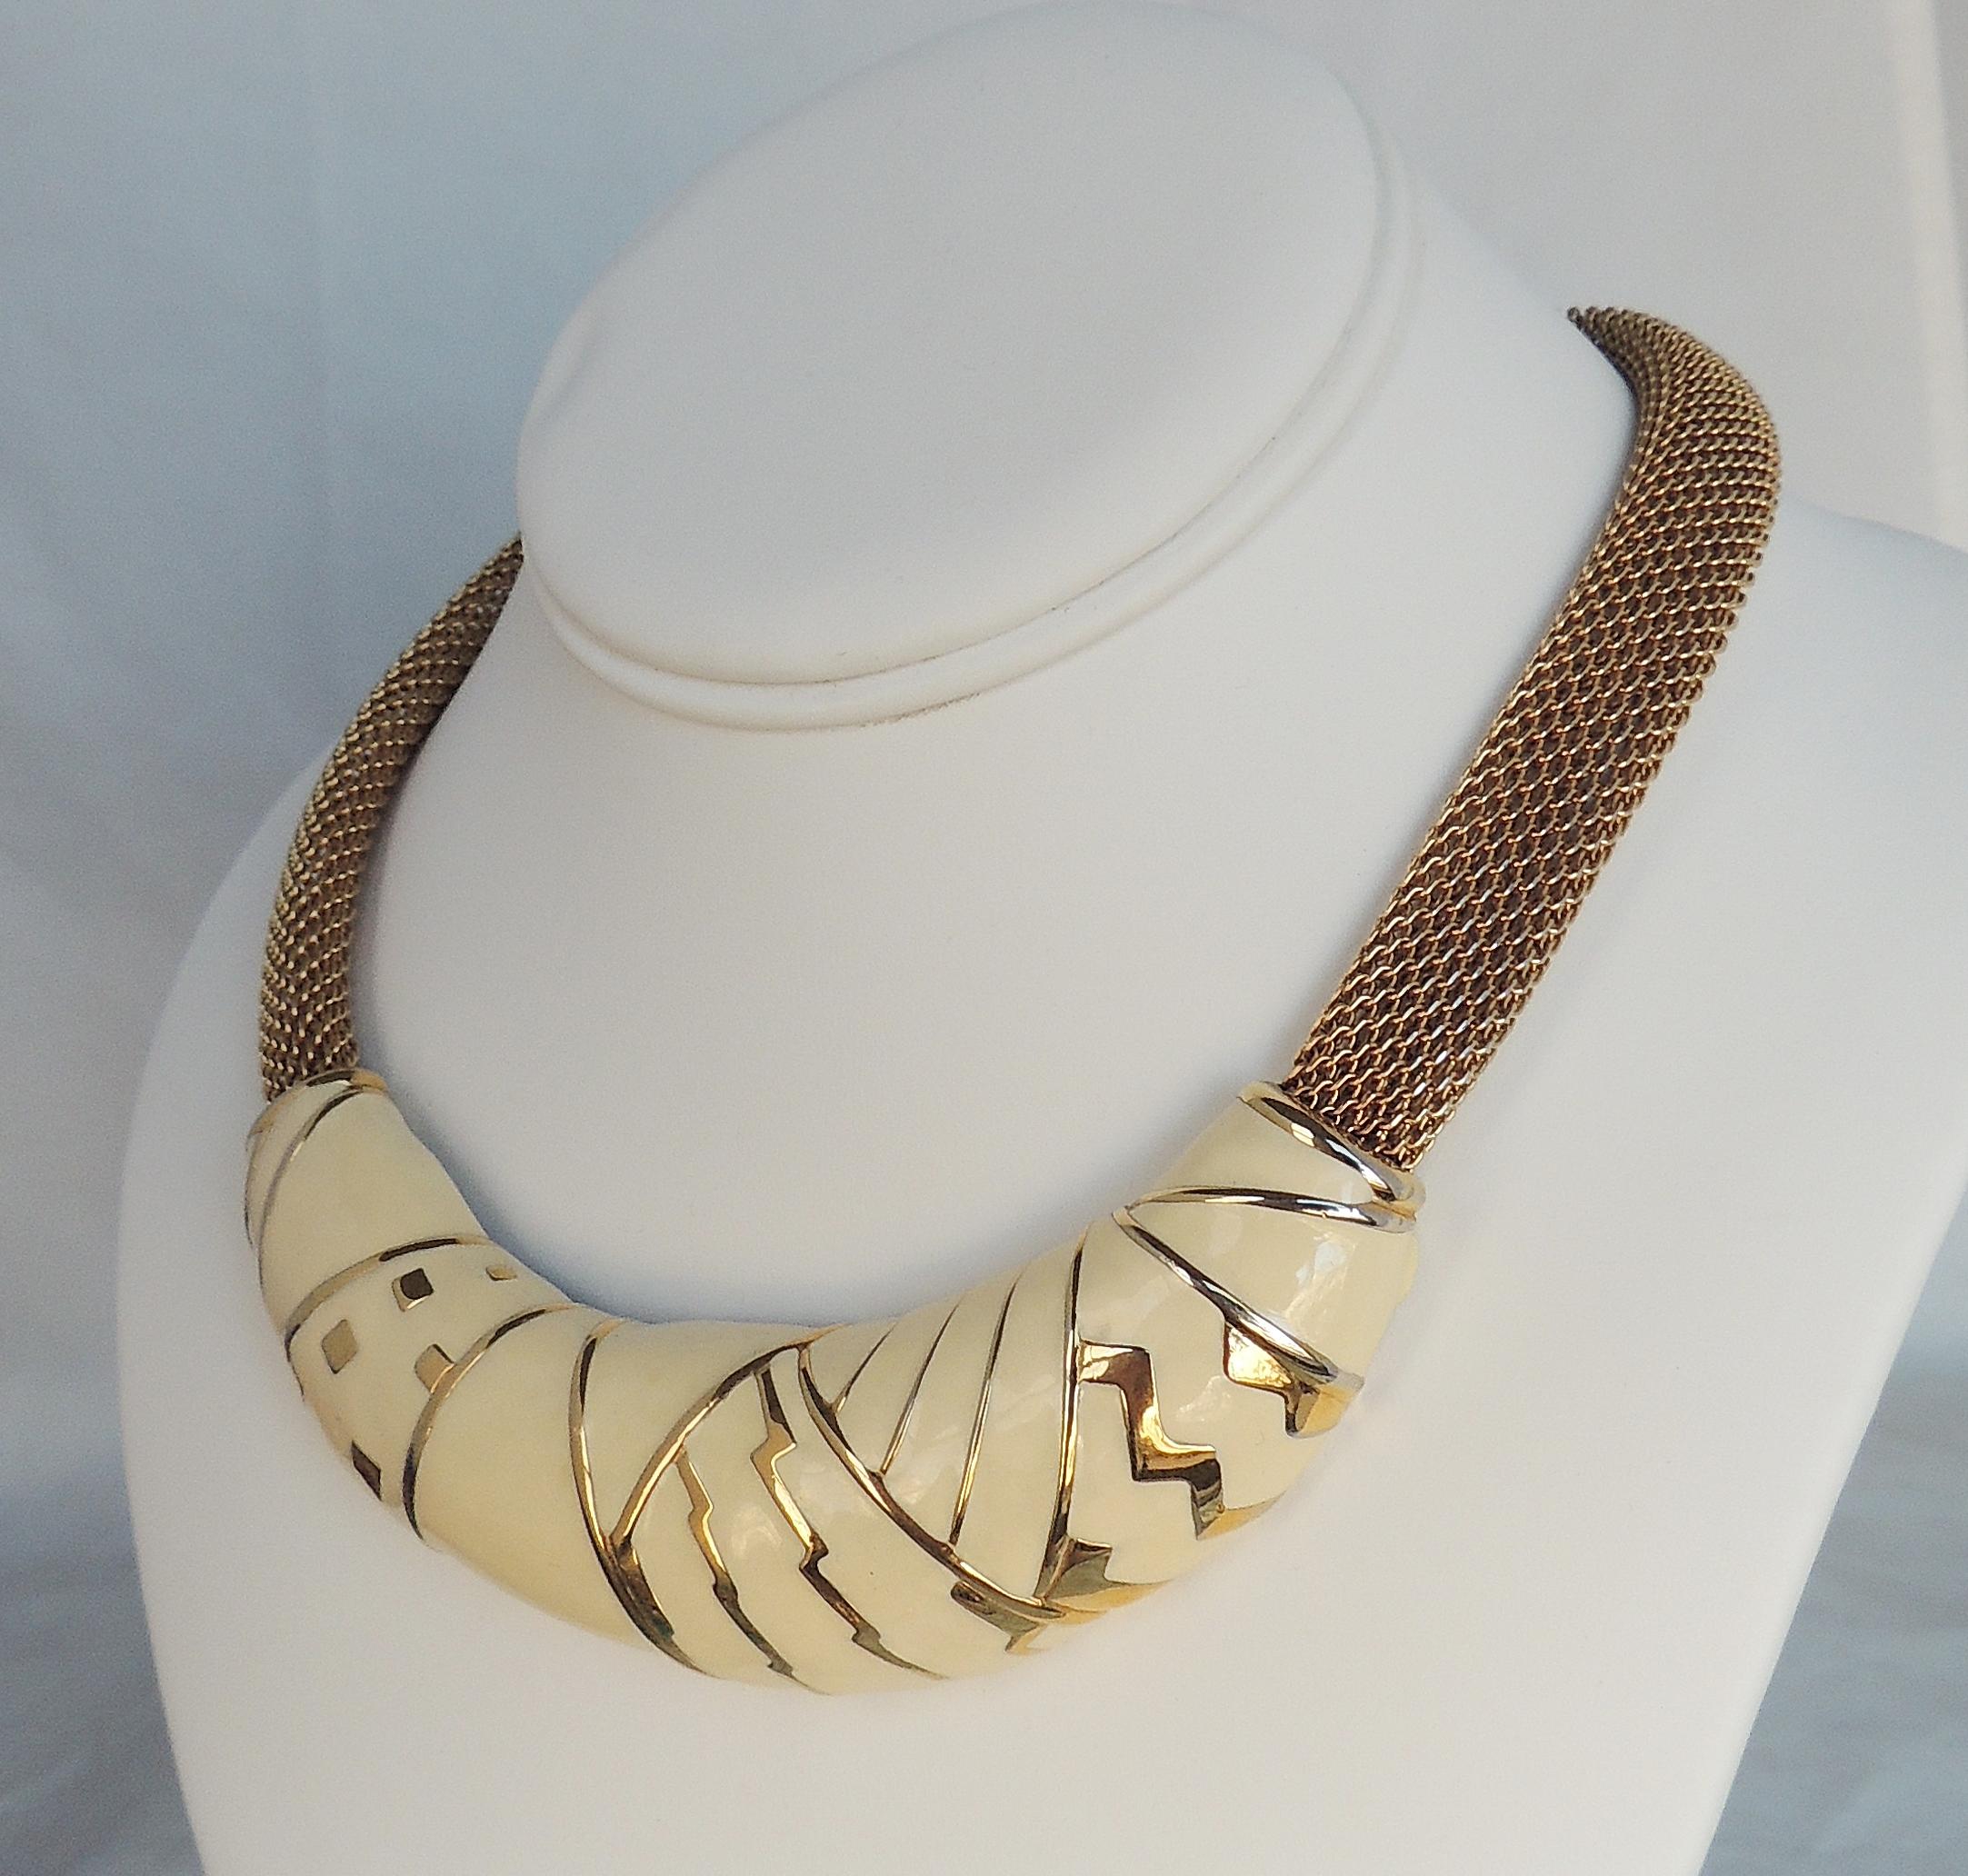 Vintage 1980s Signed Monet Modernist Goldtone & White Enamel Collar Necklace In Excellent Condition For Sale In Easton, PA